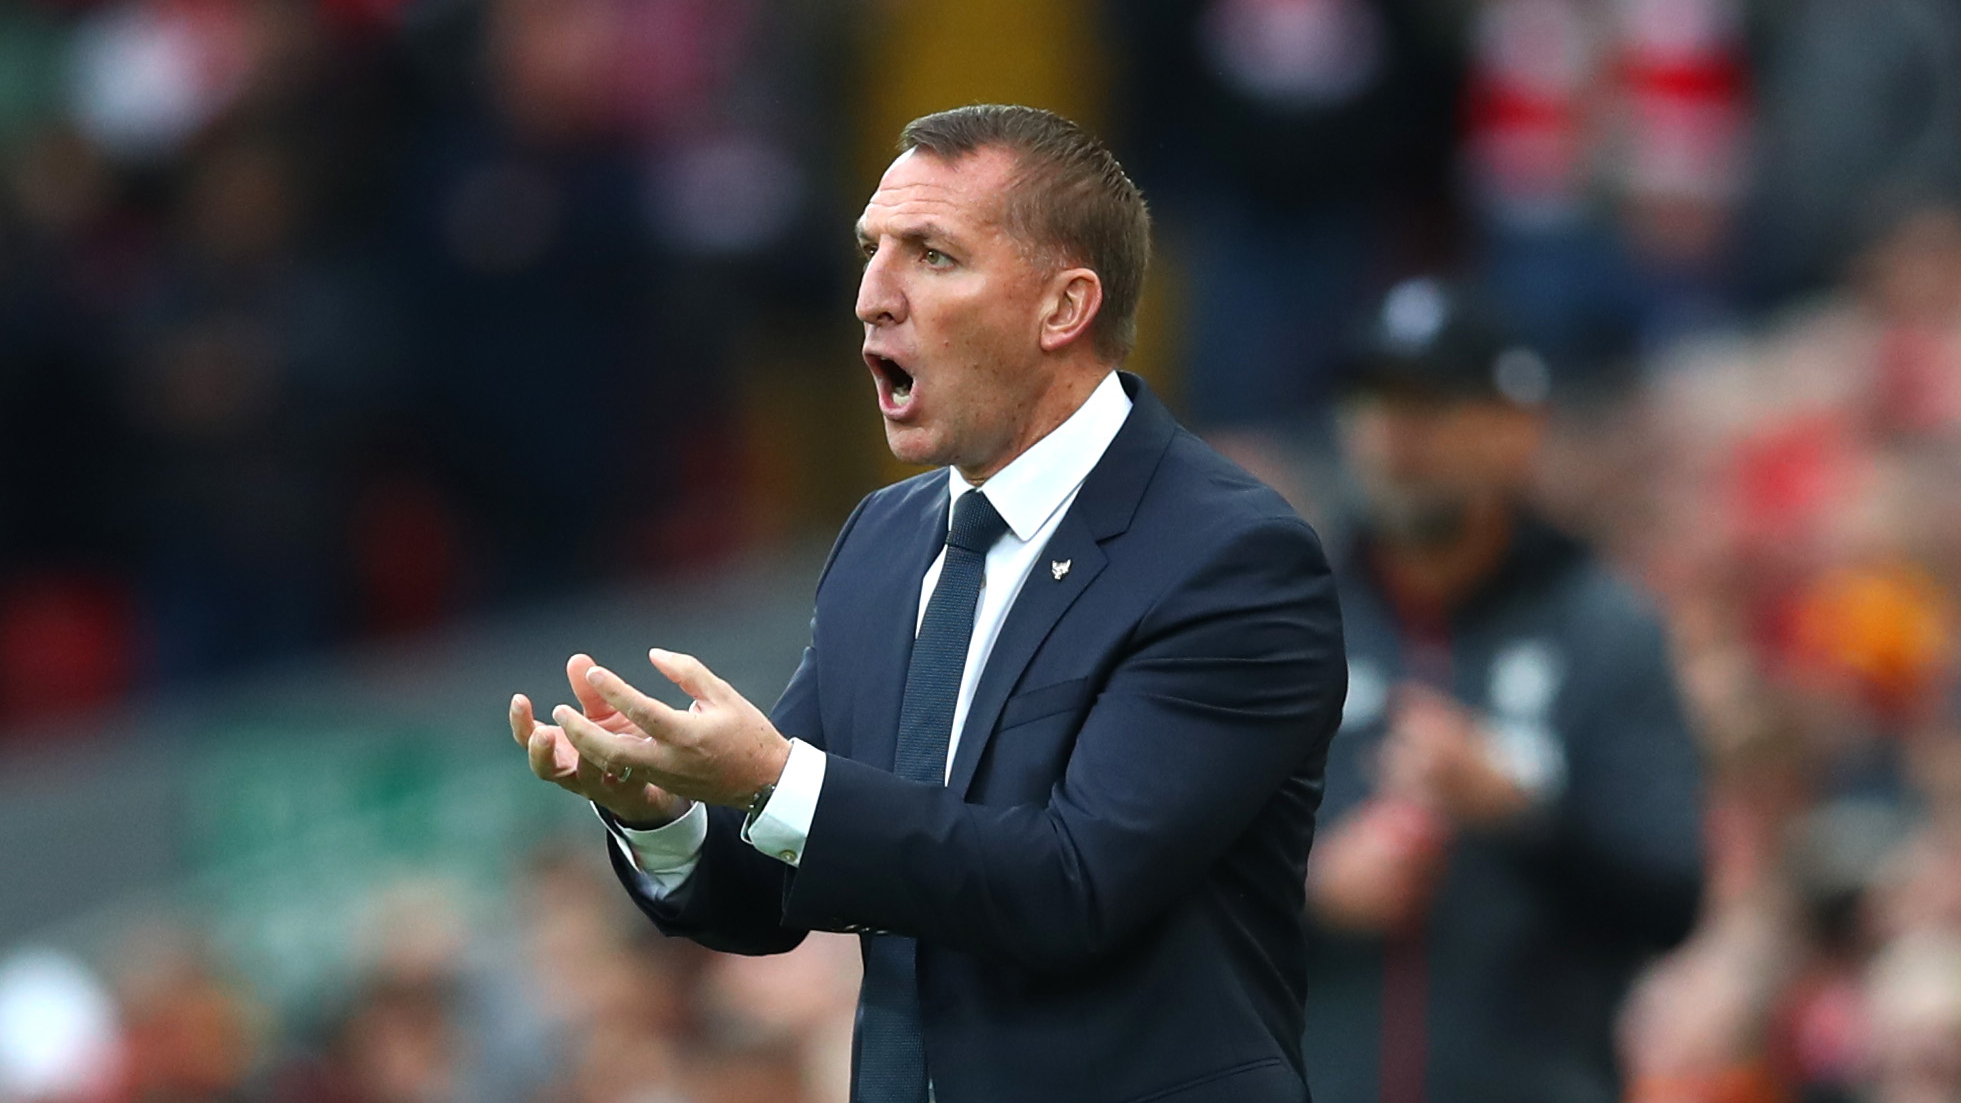 Leicester boss Rodgers sends warning to Chelsea and Liverpool over top four race - Bóng Đá